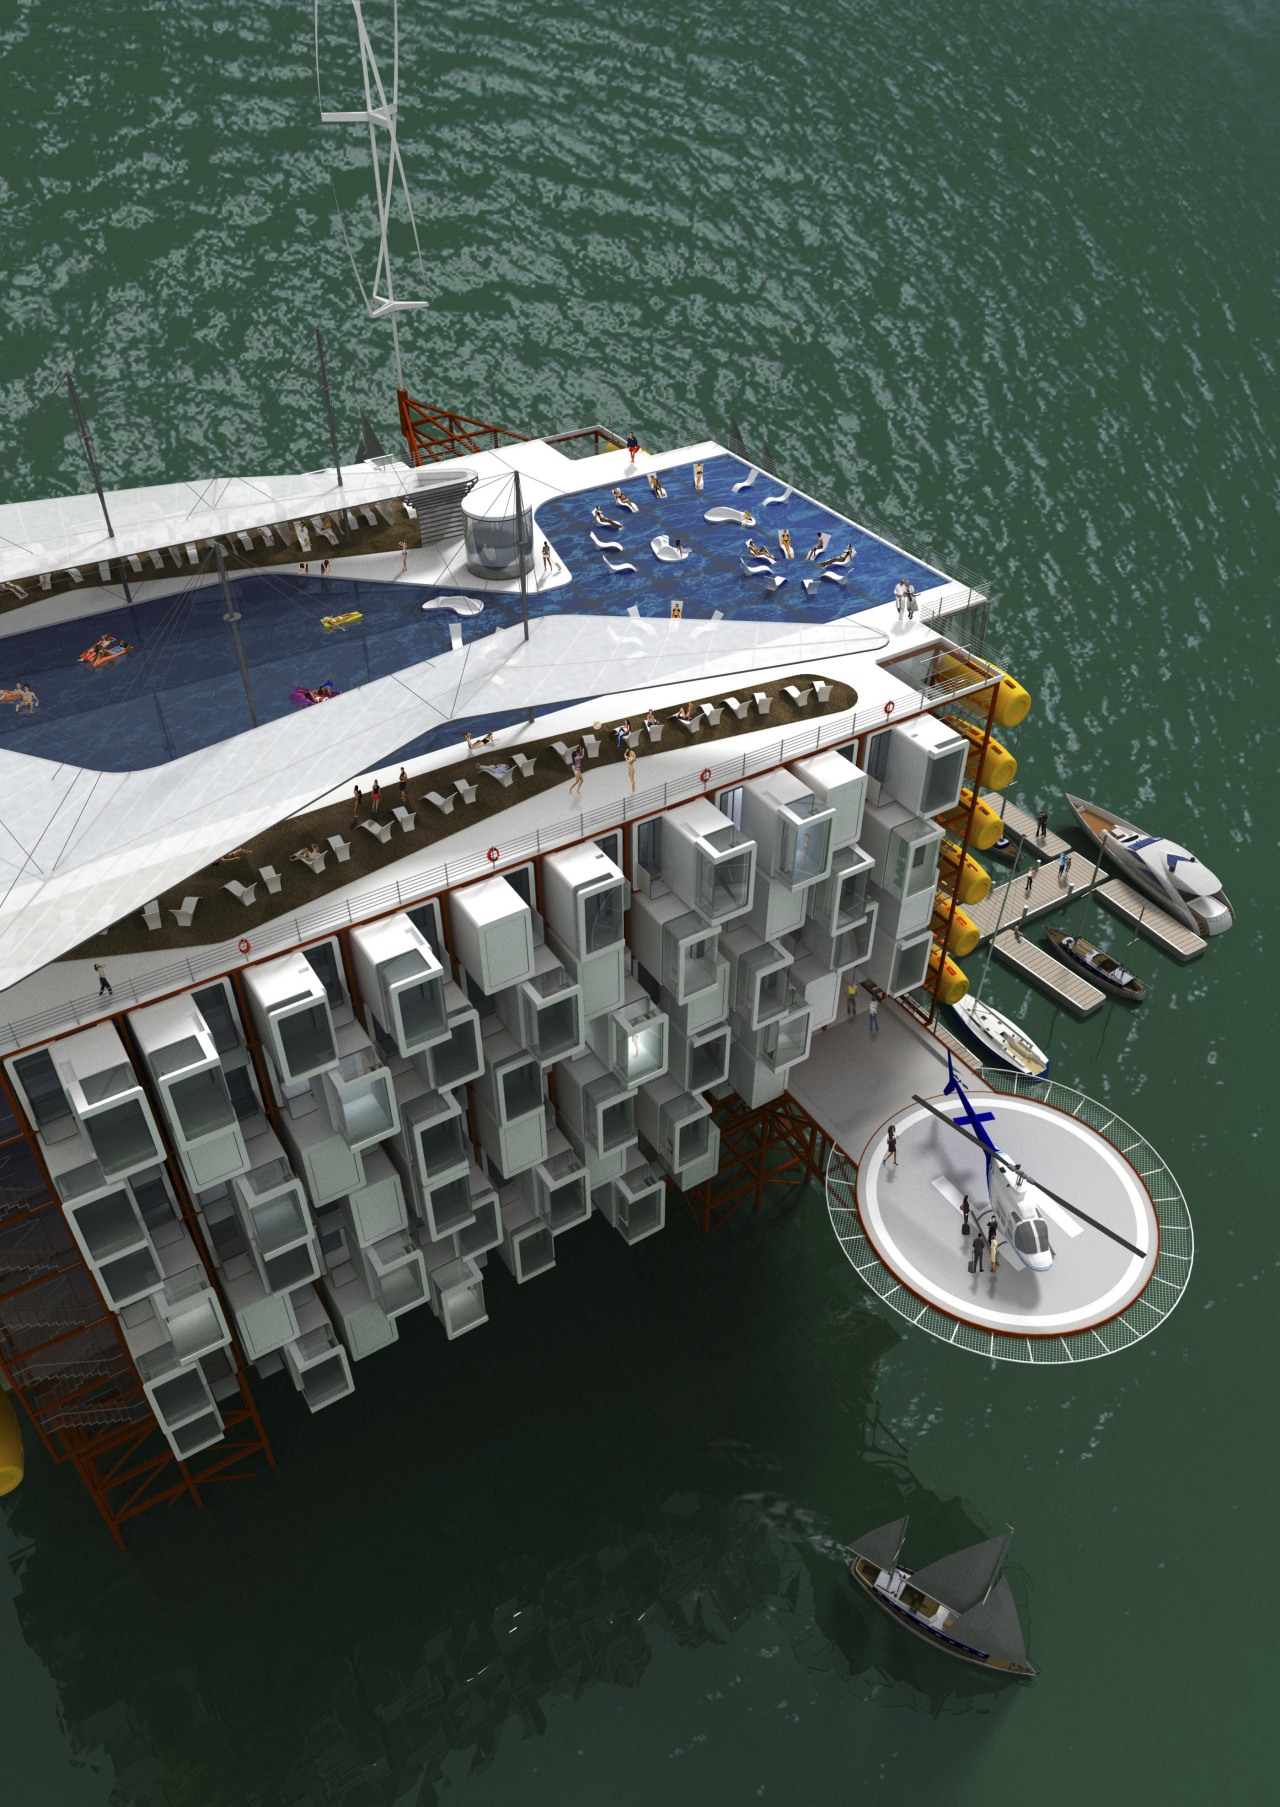 An Oil Rig Resort by Morris Architechs. Just boat, naval architecture, water, water transportation, watercraft, yacht, teal